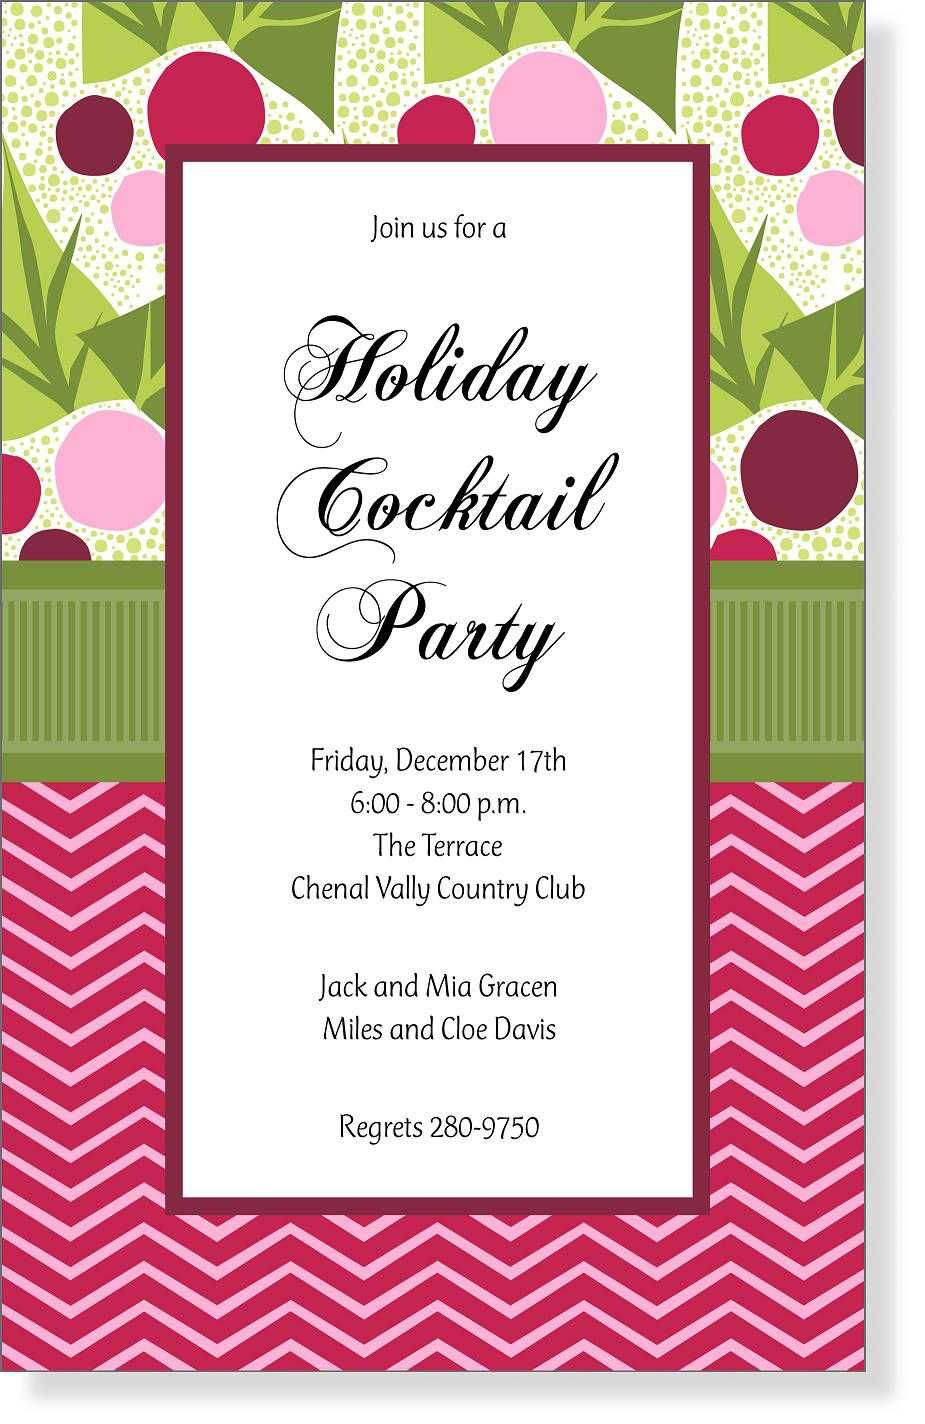 Christmas Open House Invitations Christmas Open House in measurements 925 X 1424